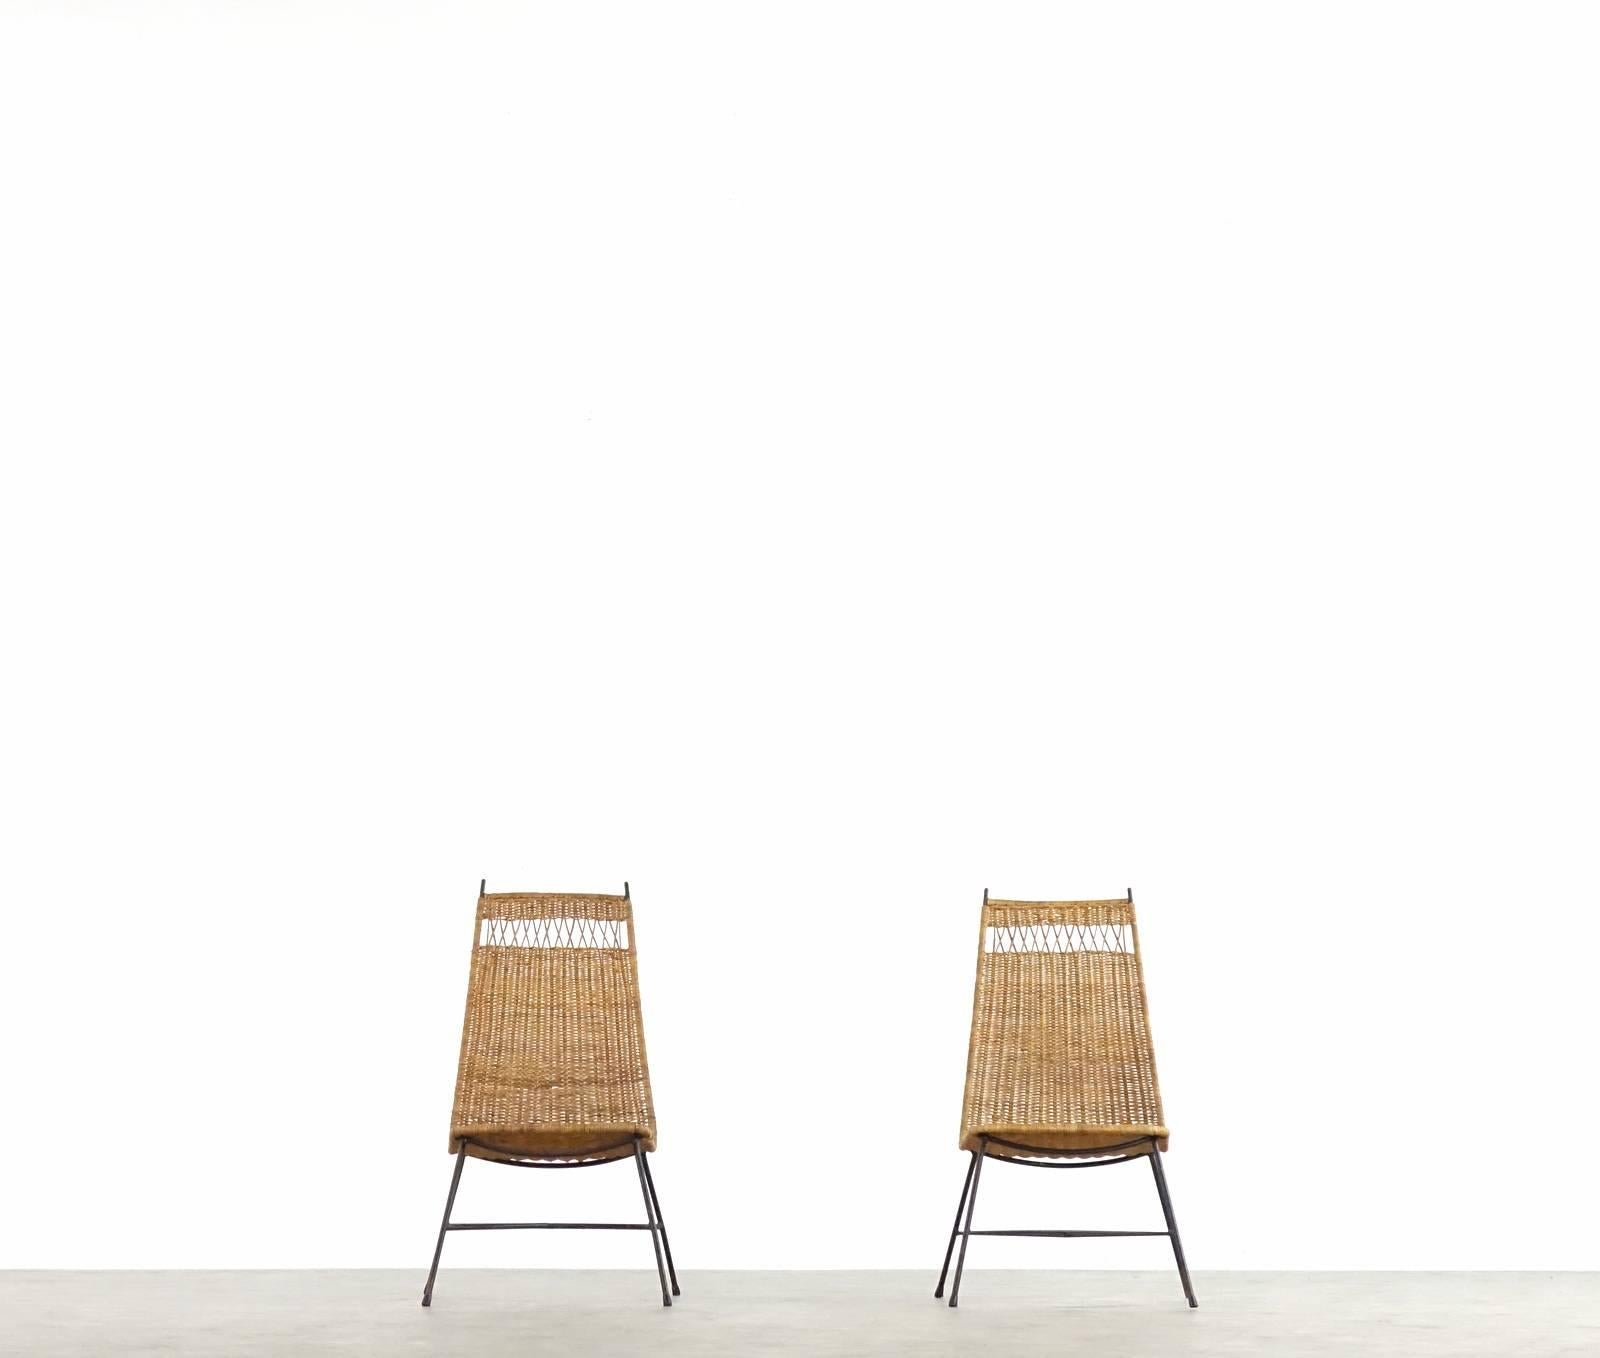 19th Century Nice Pair of Mid-Century Modern Wicker Basket Lounge Chairs from France